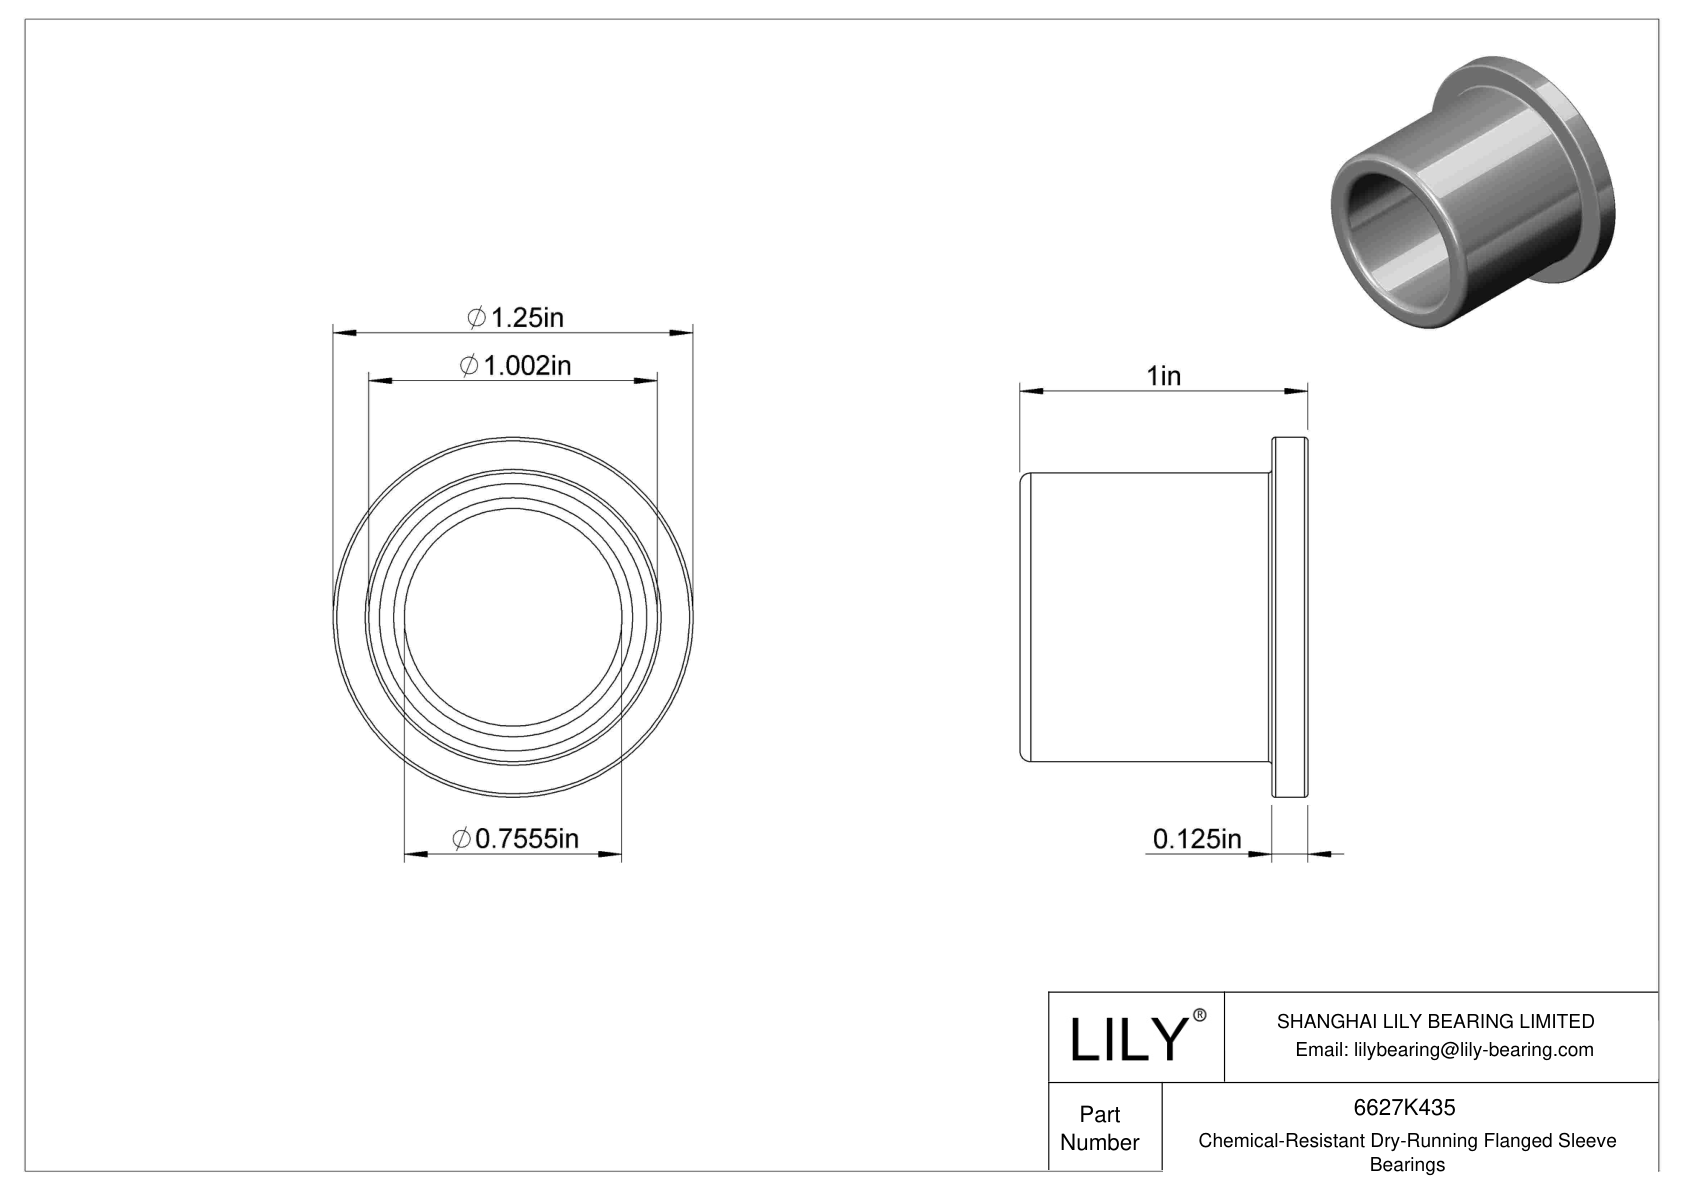 GGCHKEDF Chemical-Resistant Dry-Running Flanged Sleeve Bearings cad drawing